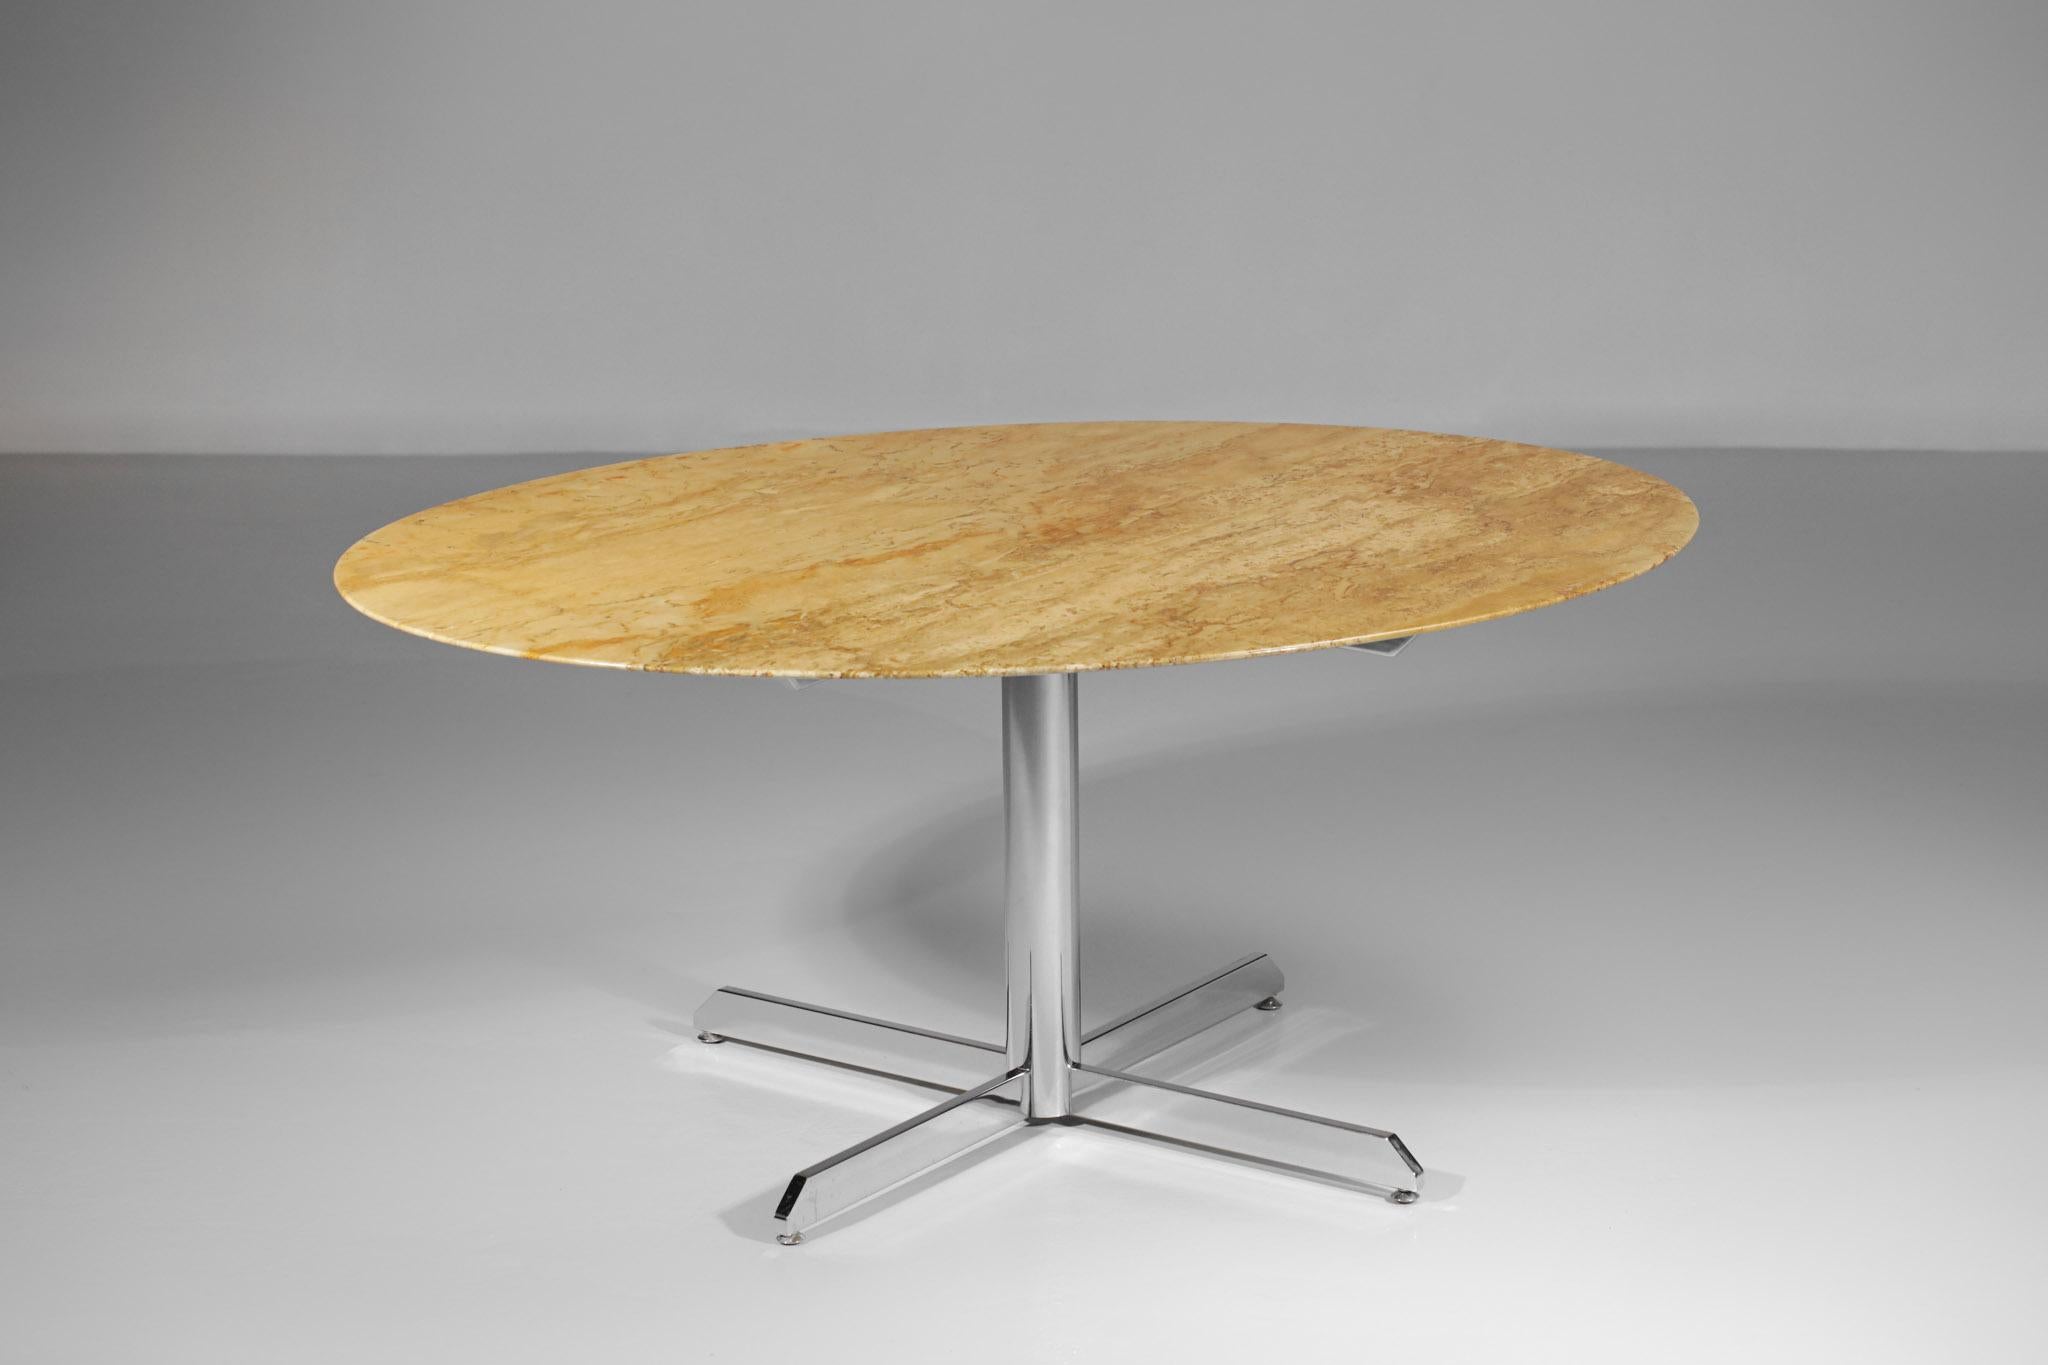 Mid-Century Modern Oval Travertine Marble Dining Table with Chrome Four Star-Feet from the 70's